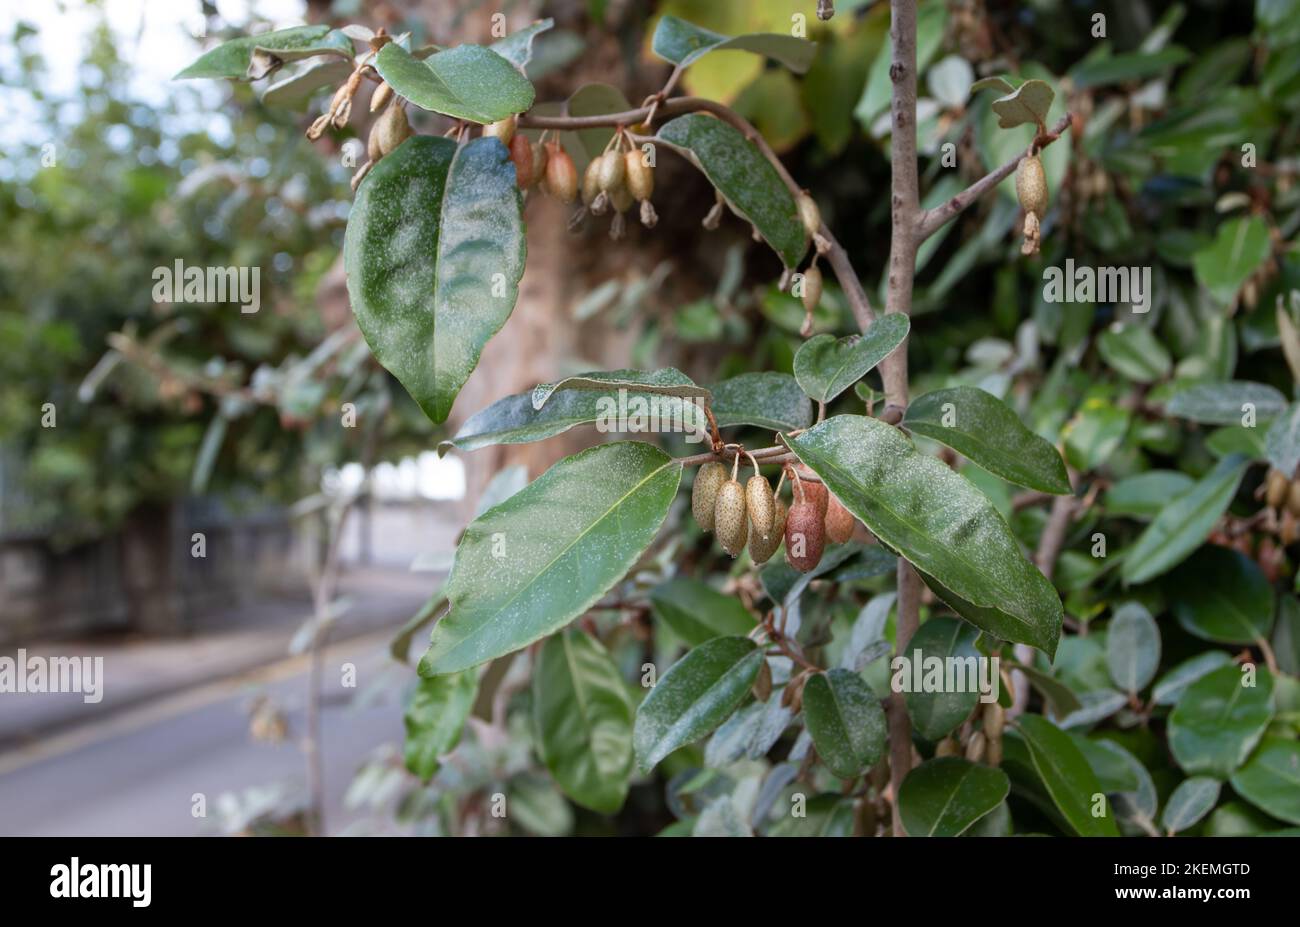 Elaeagnus ebbingei or silverberry or oleaster plant branches with fruits and silvery leaves Stock Photo